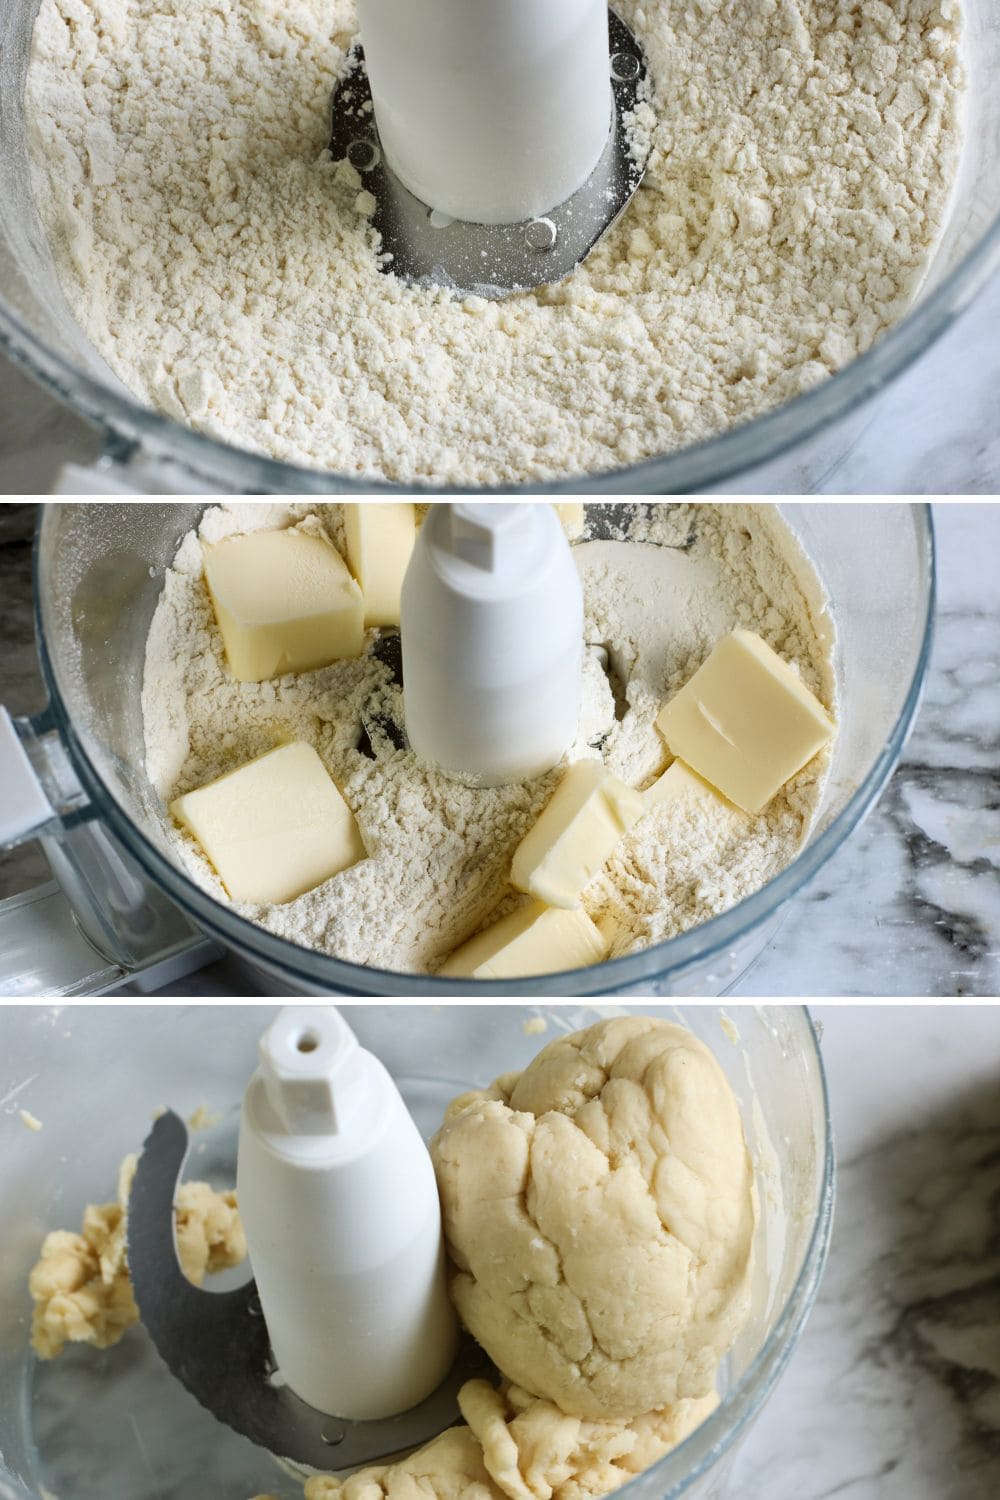 3 photos of a food processor, top is of dry ingredients, middle is with added butter cubes, bottom is a formed dough ball.